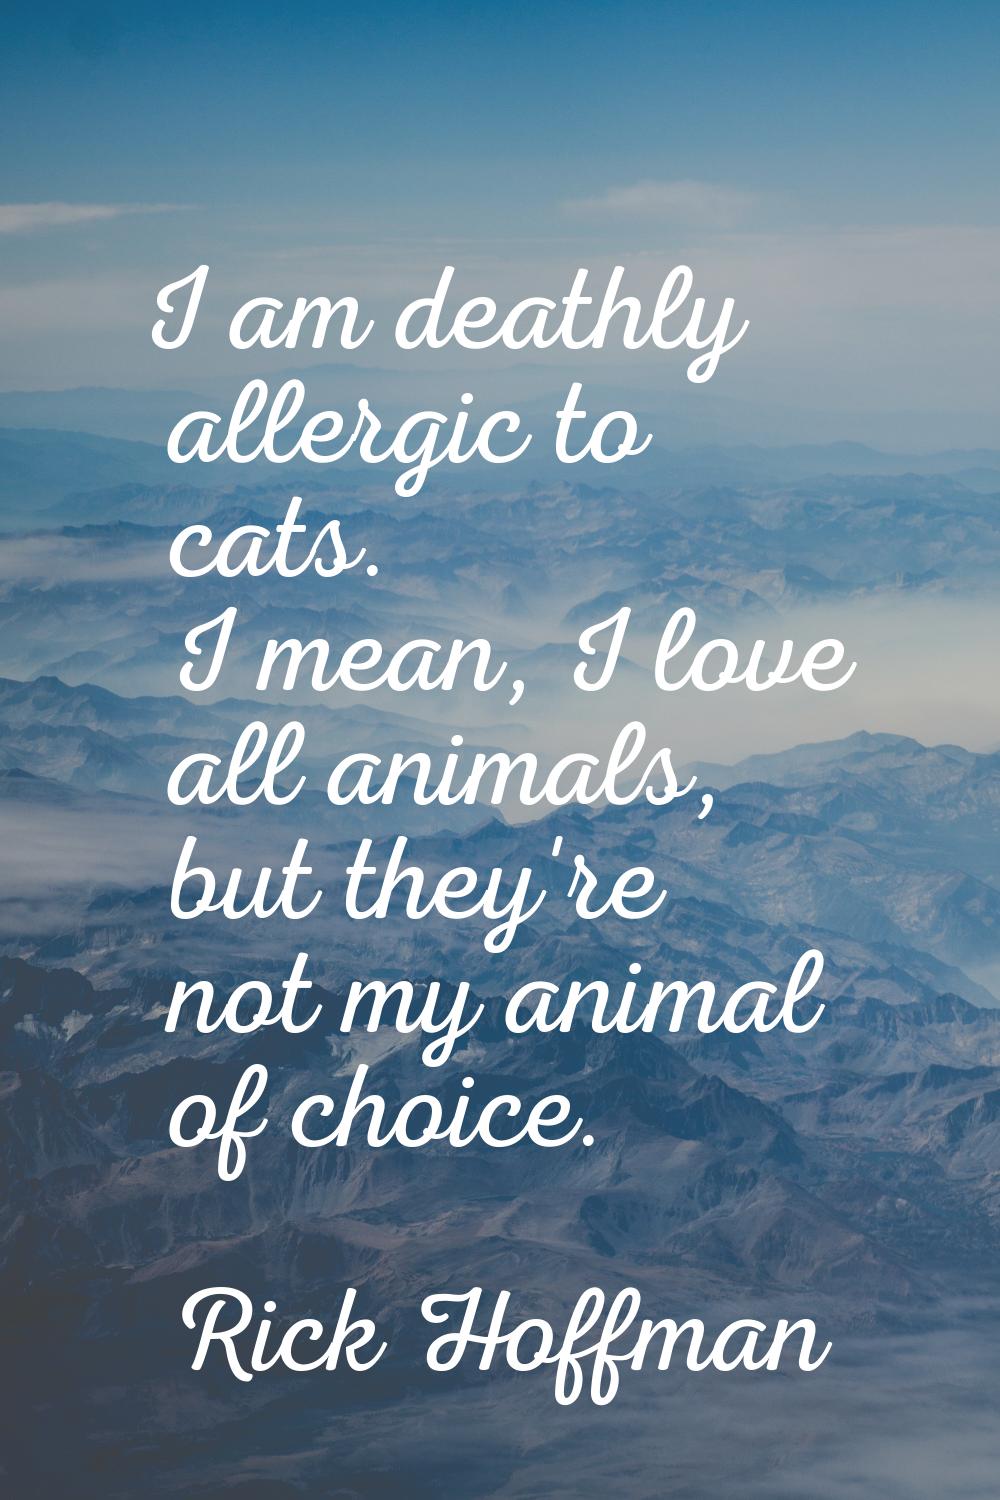 I am deathly allergic to cats. I mean, I love all animals, but they're not my animal of choice.